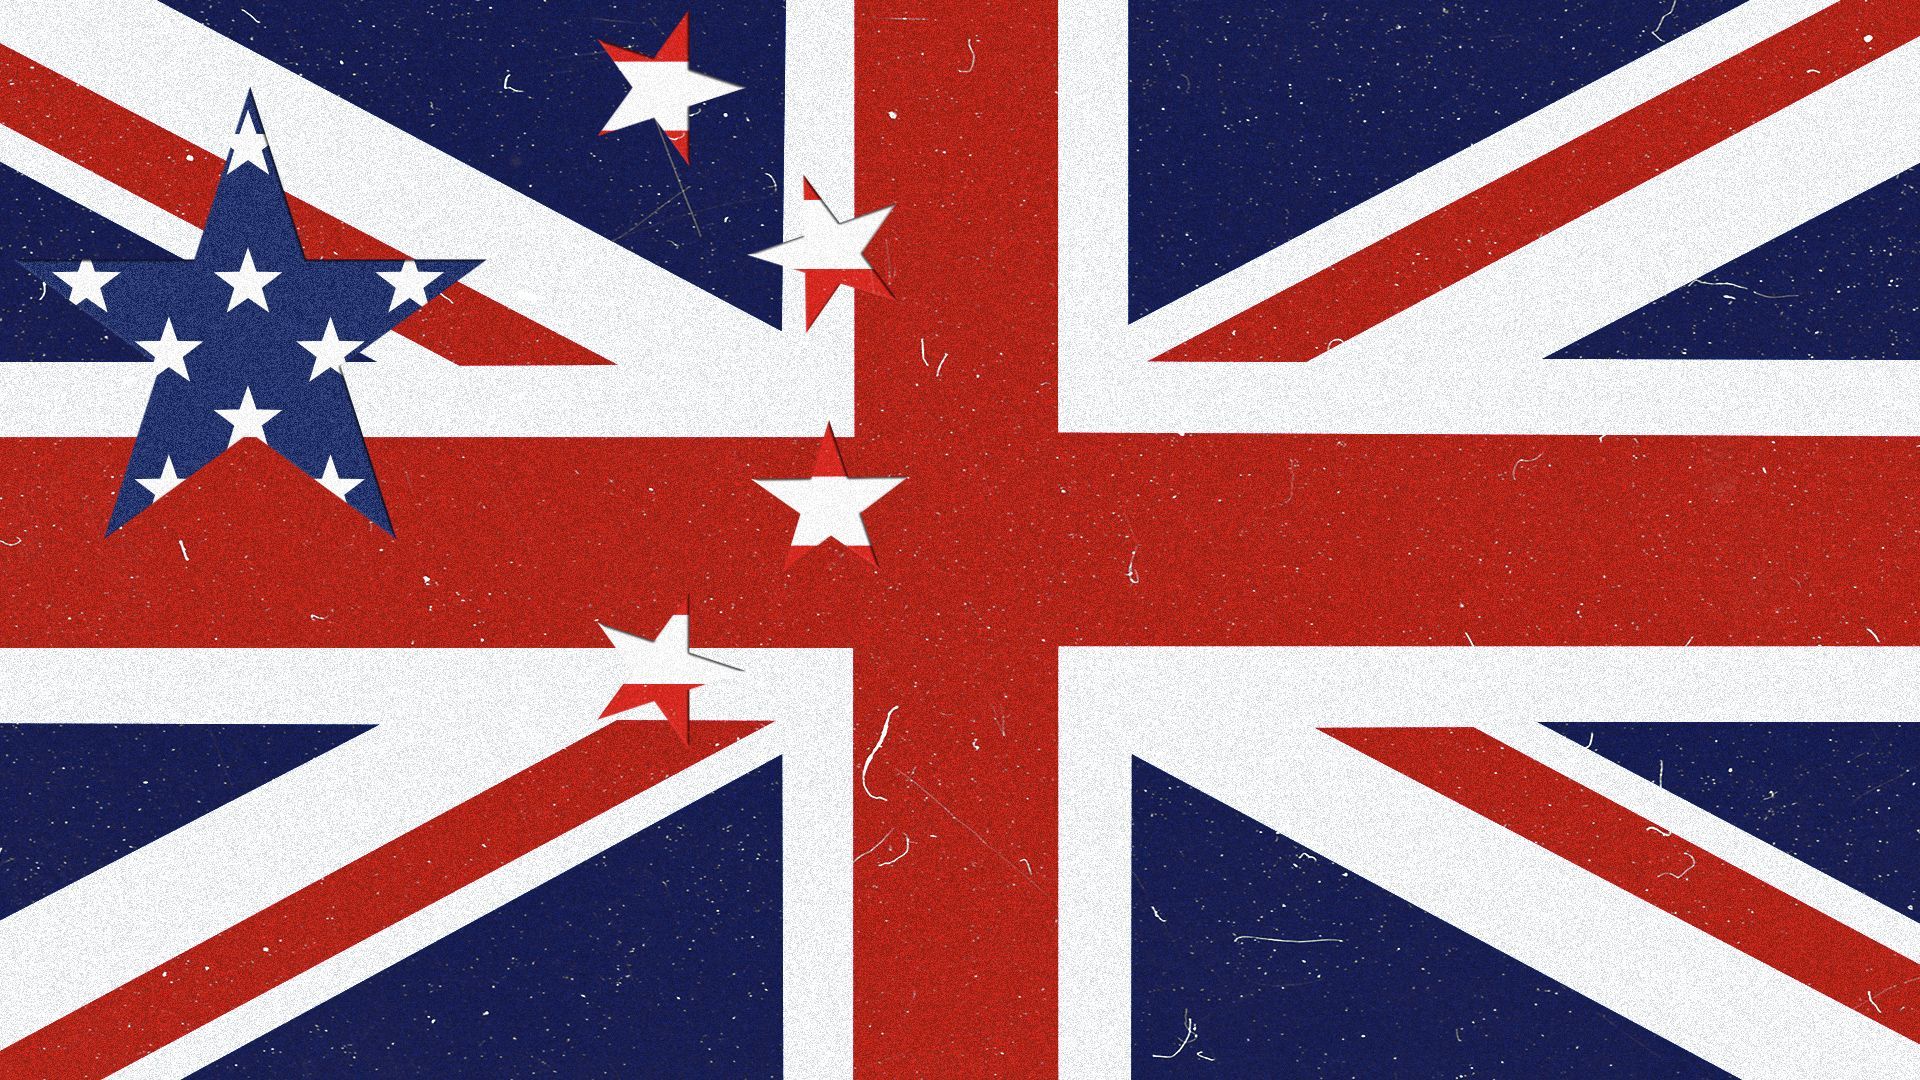 Illustration of the UK flag with the stars of the Chinese flag cut out, revealing a United States of America flag pattern underneath. 